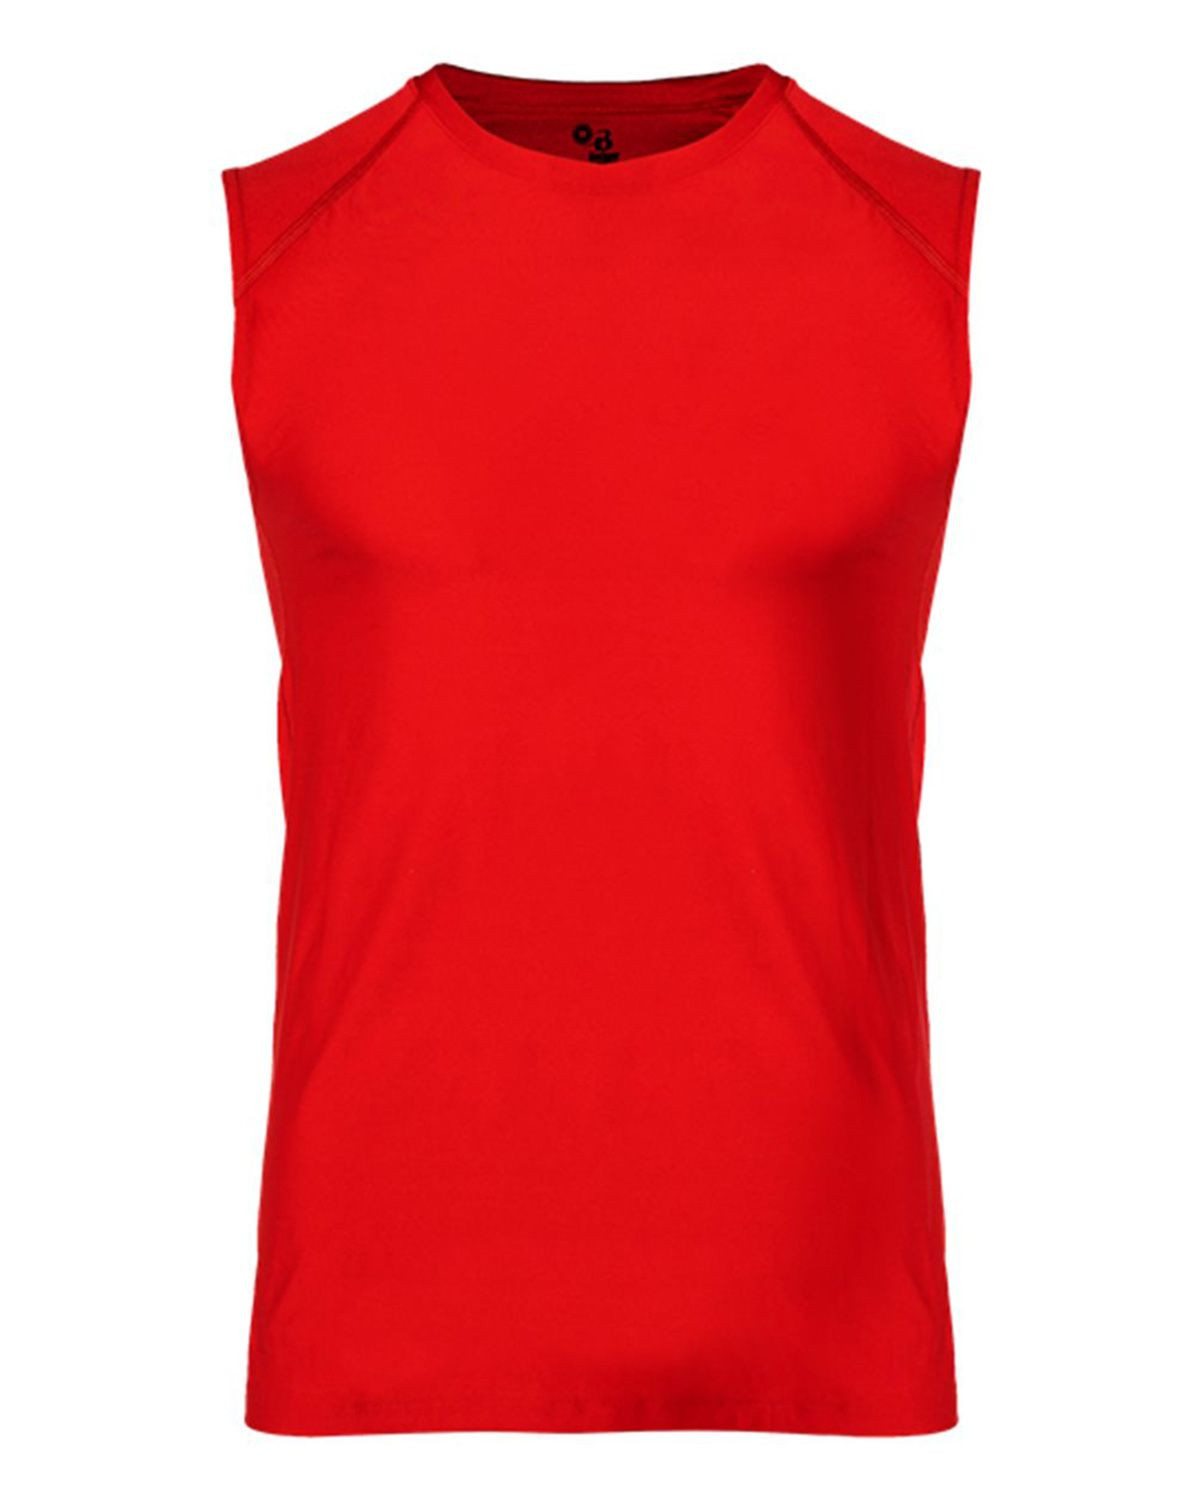 Badger 2530 Youth Fitted Battle Sleeveless Tee - Red - XS #sleeveless